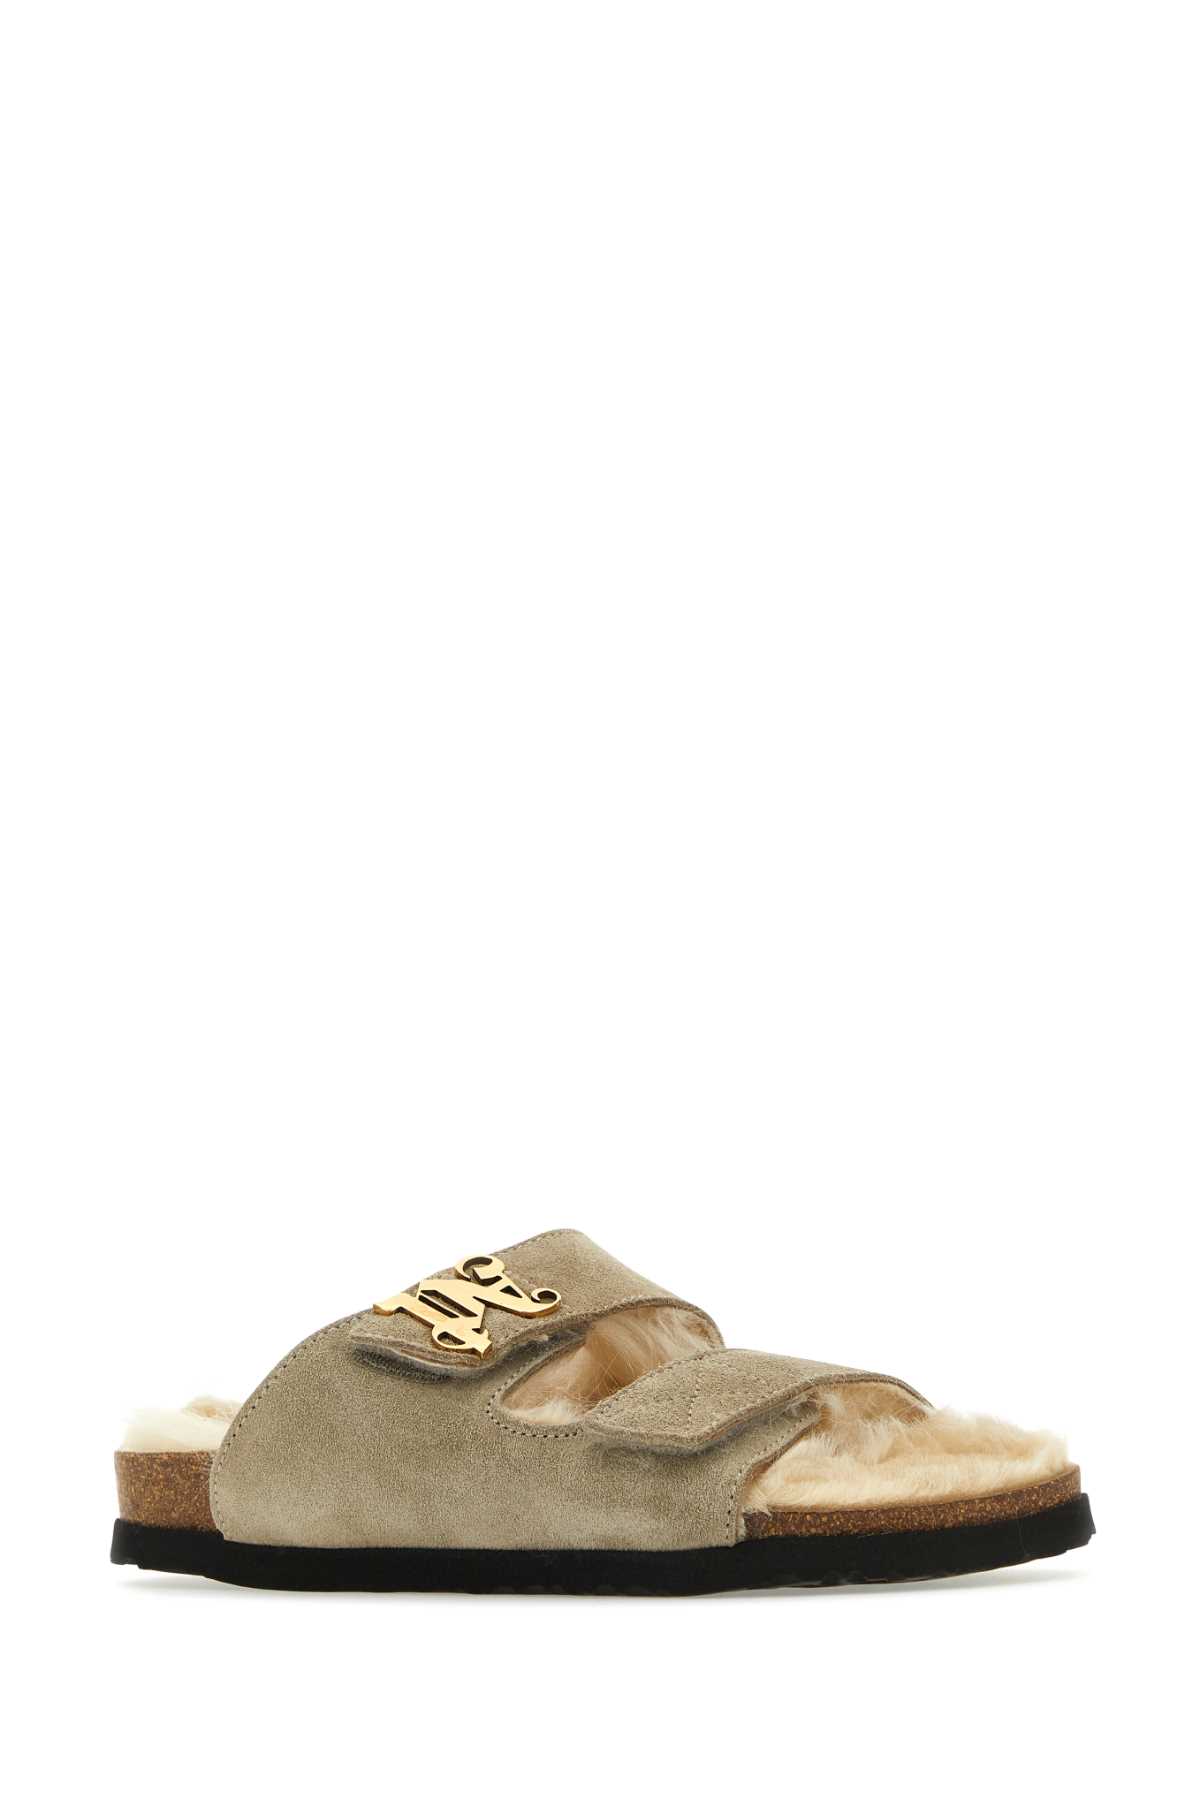 Palm Angels Sand Suede Slippers In Creambeig